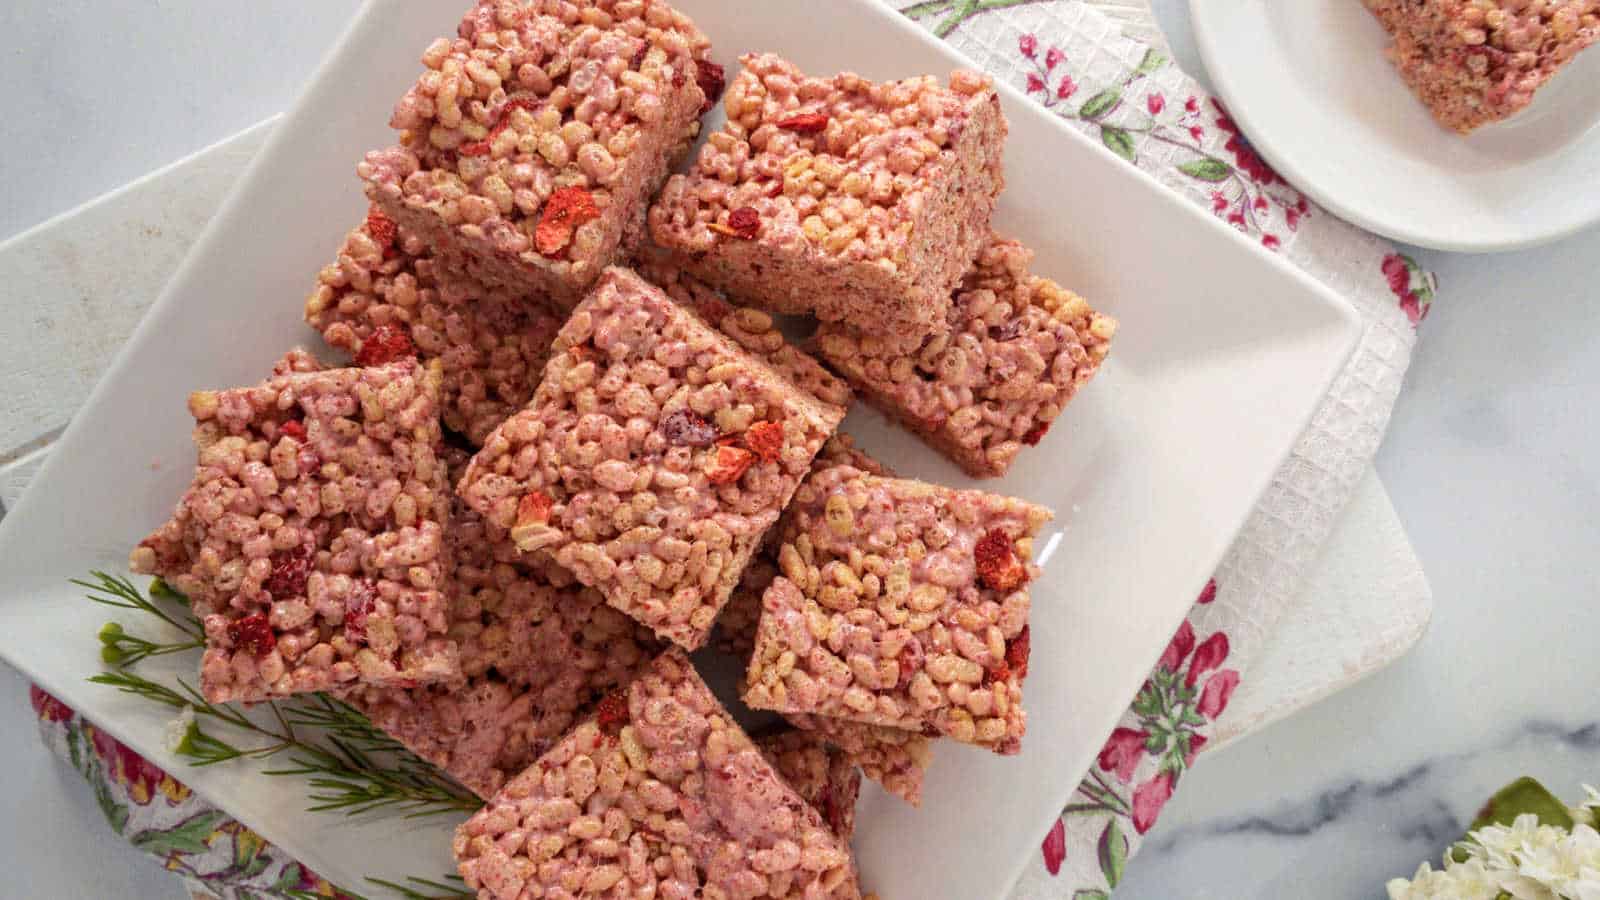 Strawberry rice krispies on a white plate and a white towel.